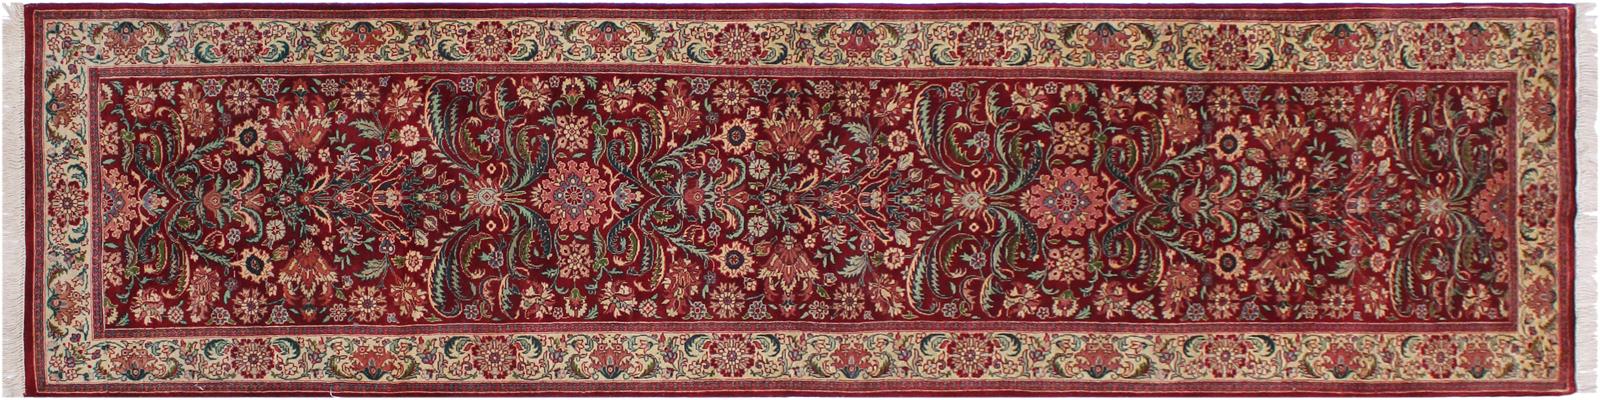 handmade Traditional Kirman Red Beige Hand Knotted RUNNER 100% WOOL area rug 3x10